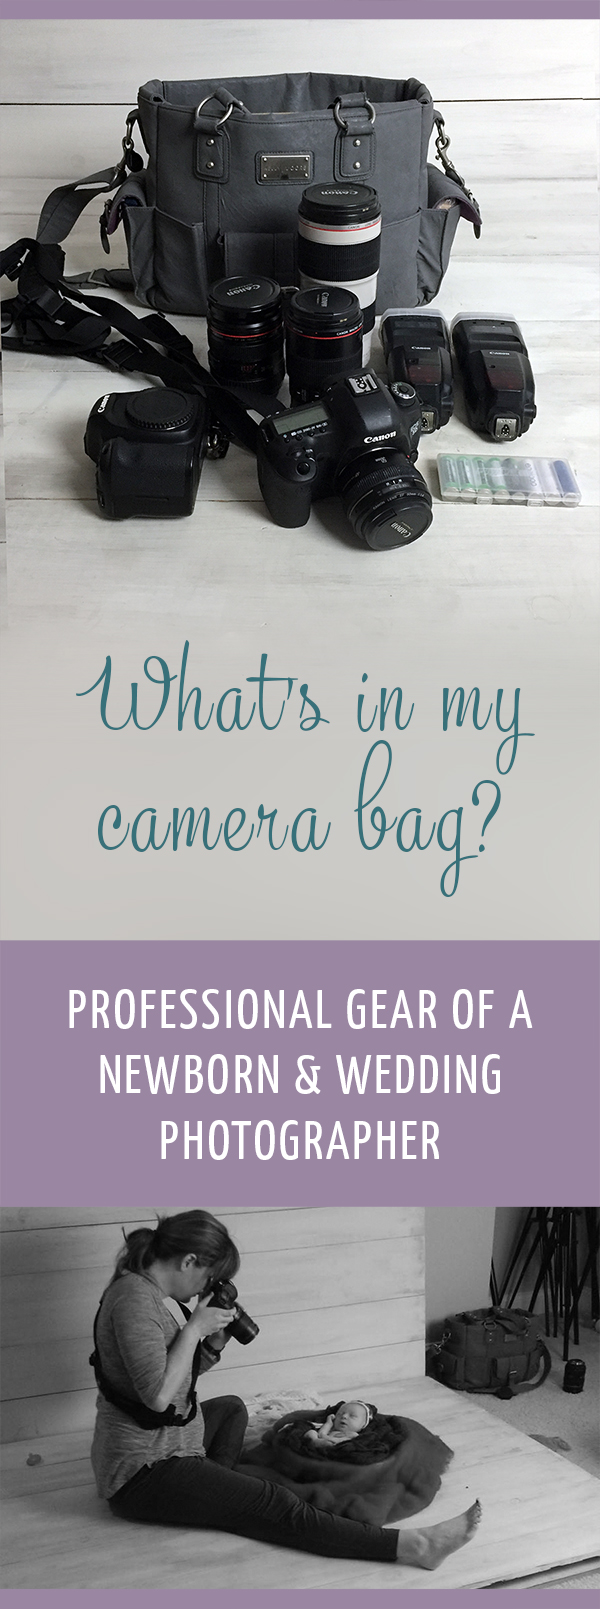 professional photography gear in camera bag